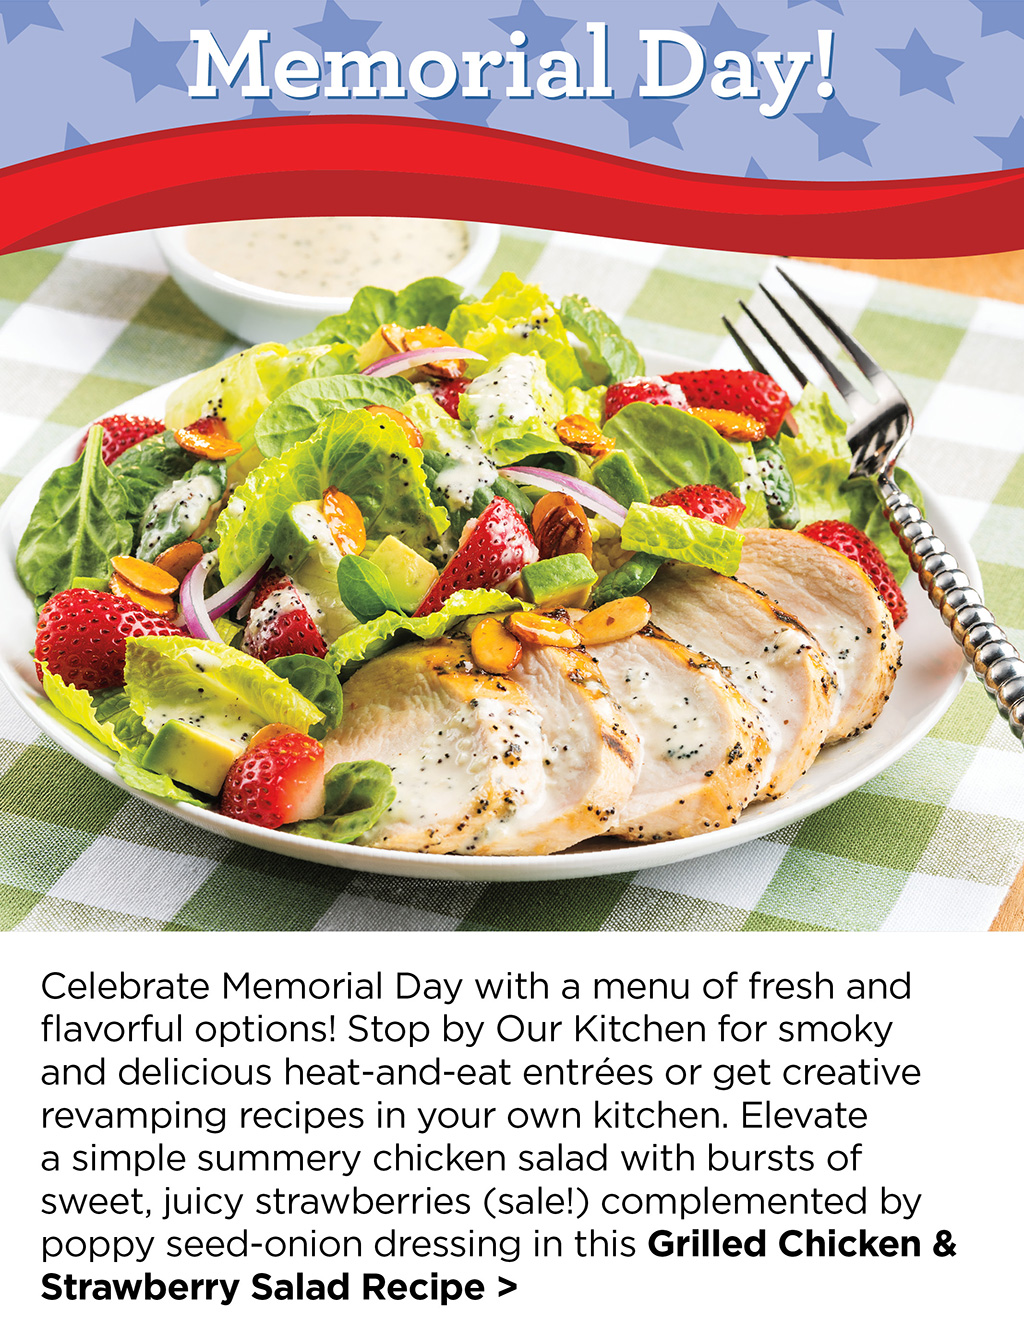 Celebrate Memorial Day with a menu of fresh and flavorful options! Stop by Our Kitchen for smoky and delicious heat-and-eat entr?es or get creative revamping recipes in your own kitchen. Elevate a simple summery chicken salad with bursts of sweet, juicy strawberries (sale!) complemented by poppy seed-onion dressing in this Grilled Chicken & Strawberry Salad Recipe >